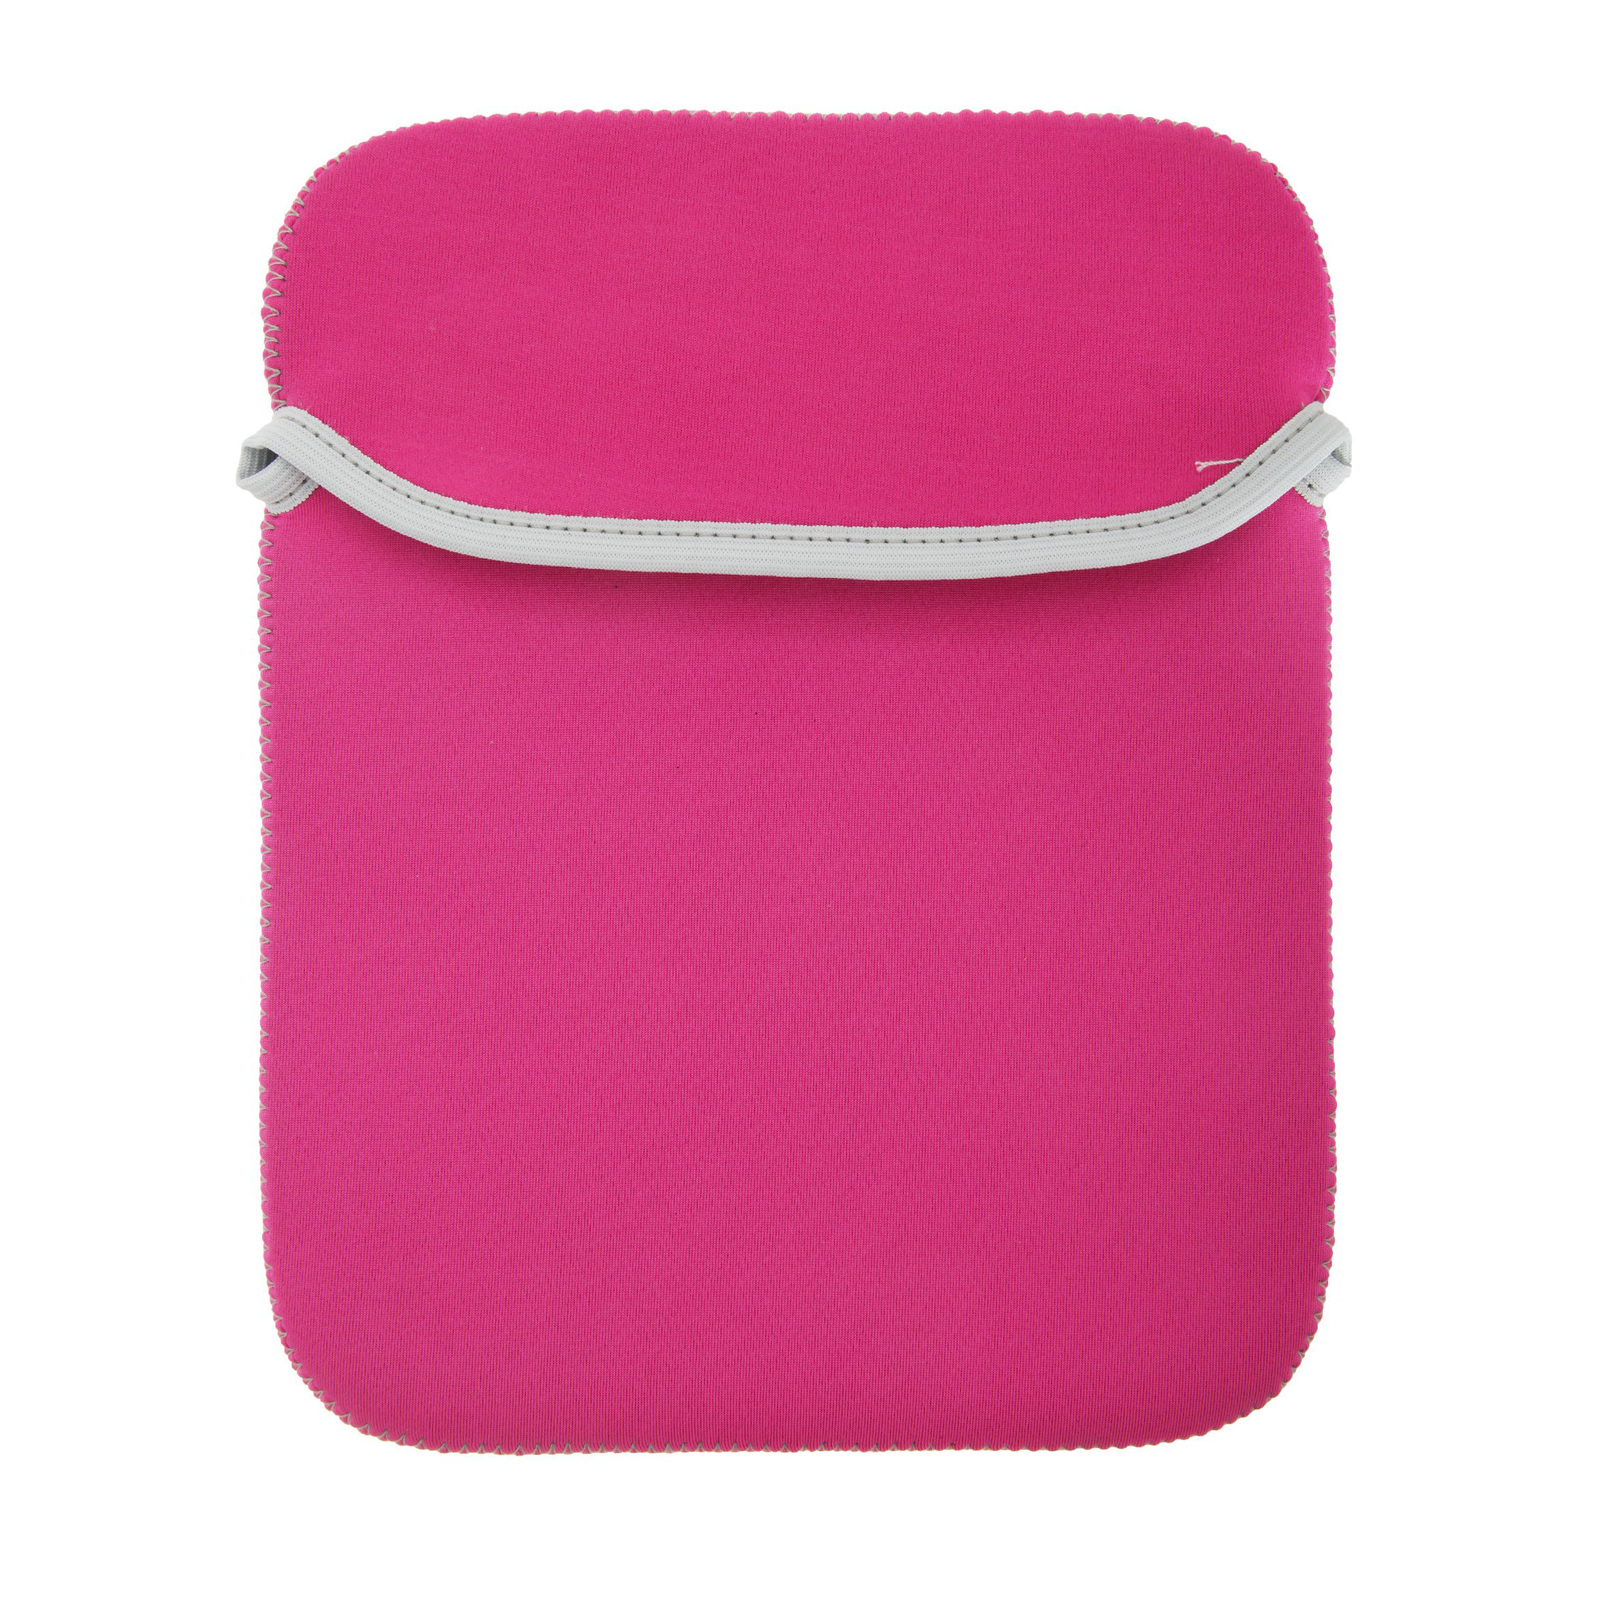 Pink 10" inch iPad Tablet Sleeves Notebook Laptop PC Case Reversible Soft Bag